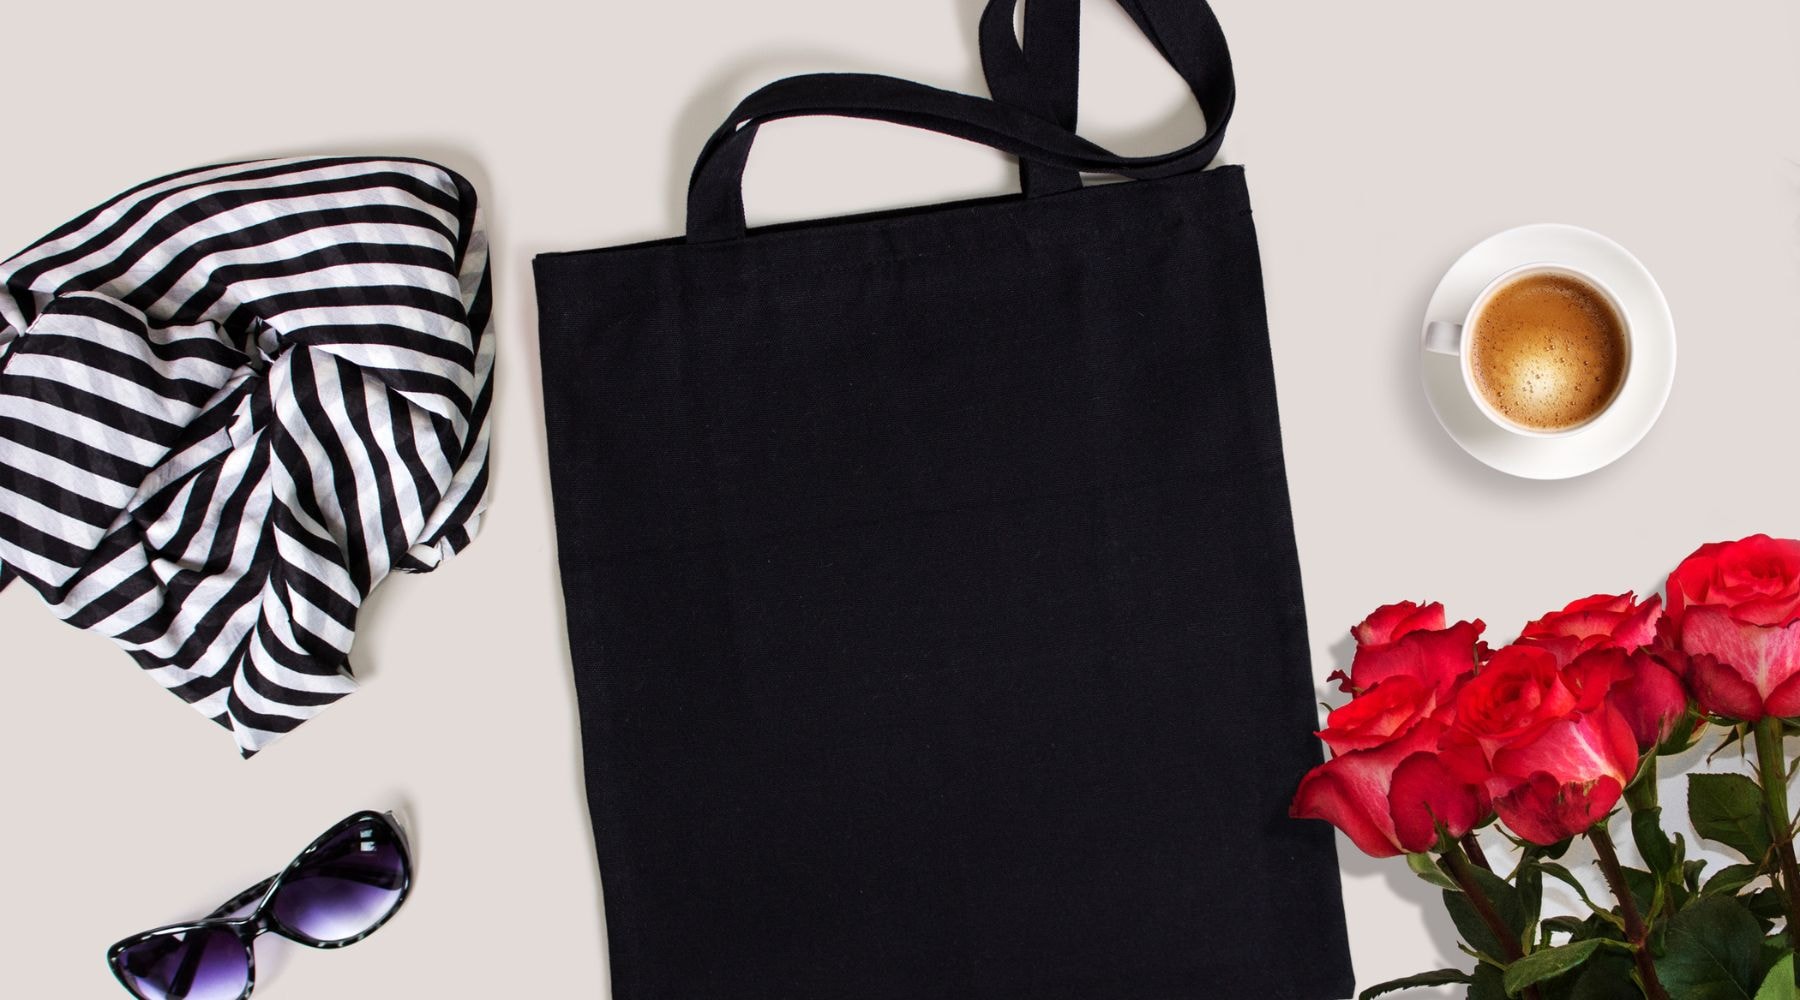 Black tote bag styled with striped scarf and sunglasses next to a cup of coffee and roses.